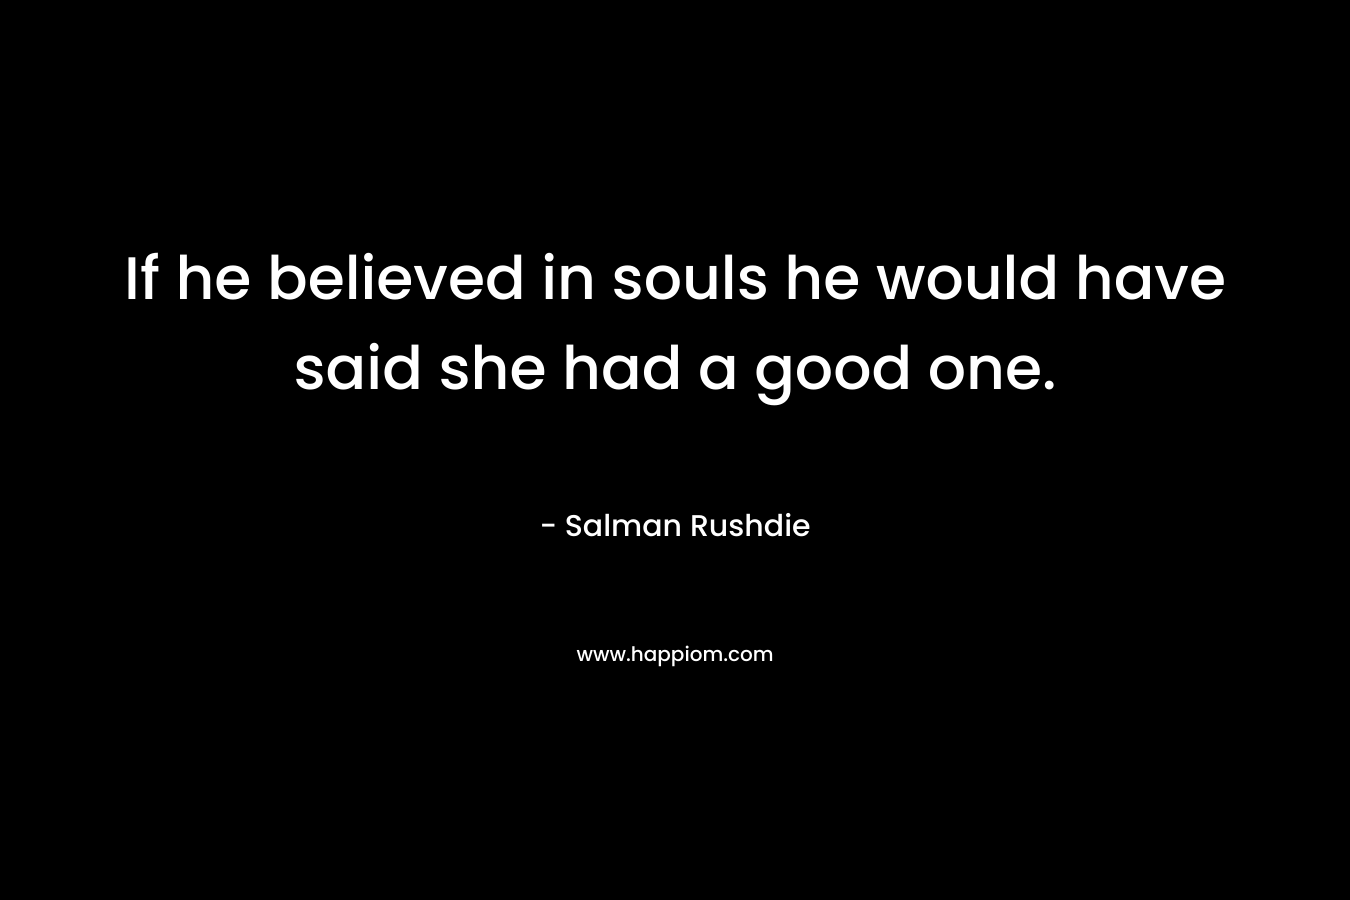 If he believed in souls he would have said she had a good one.